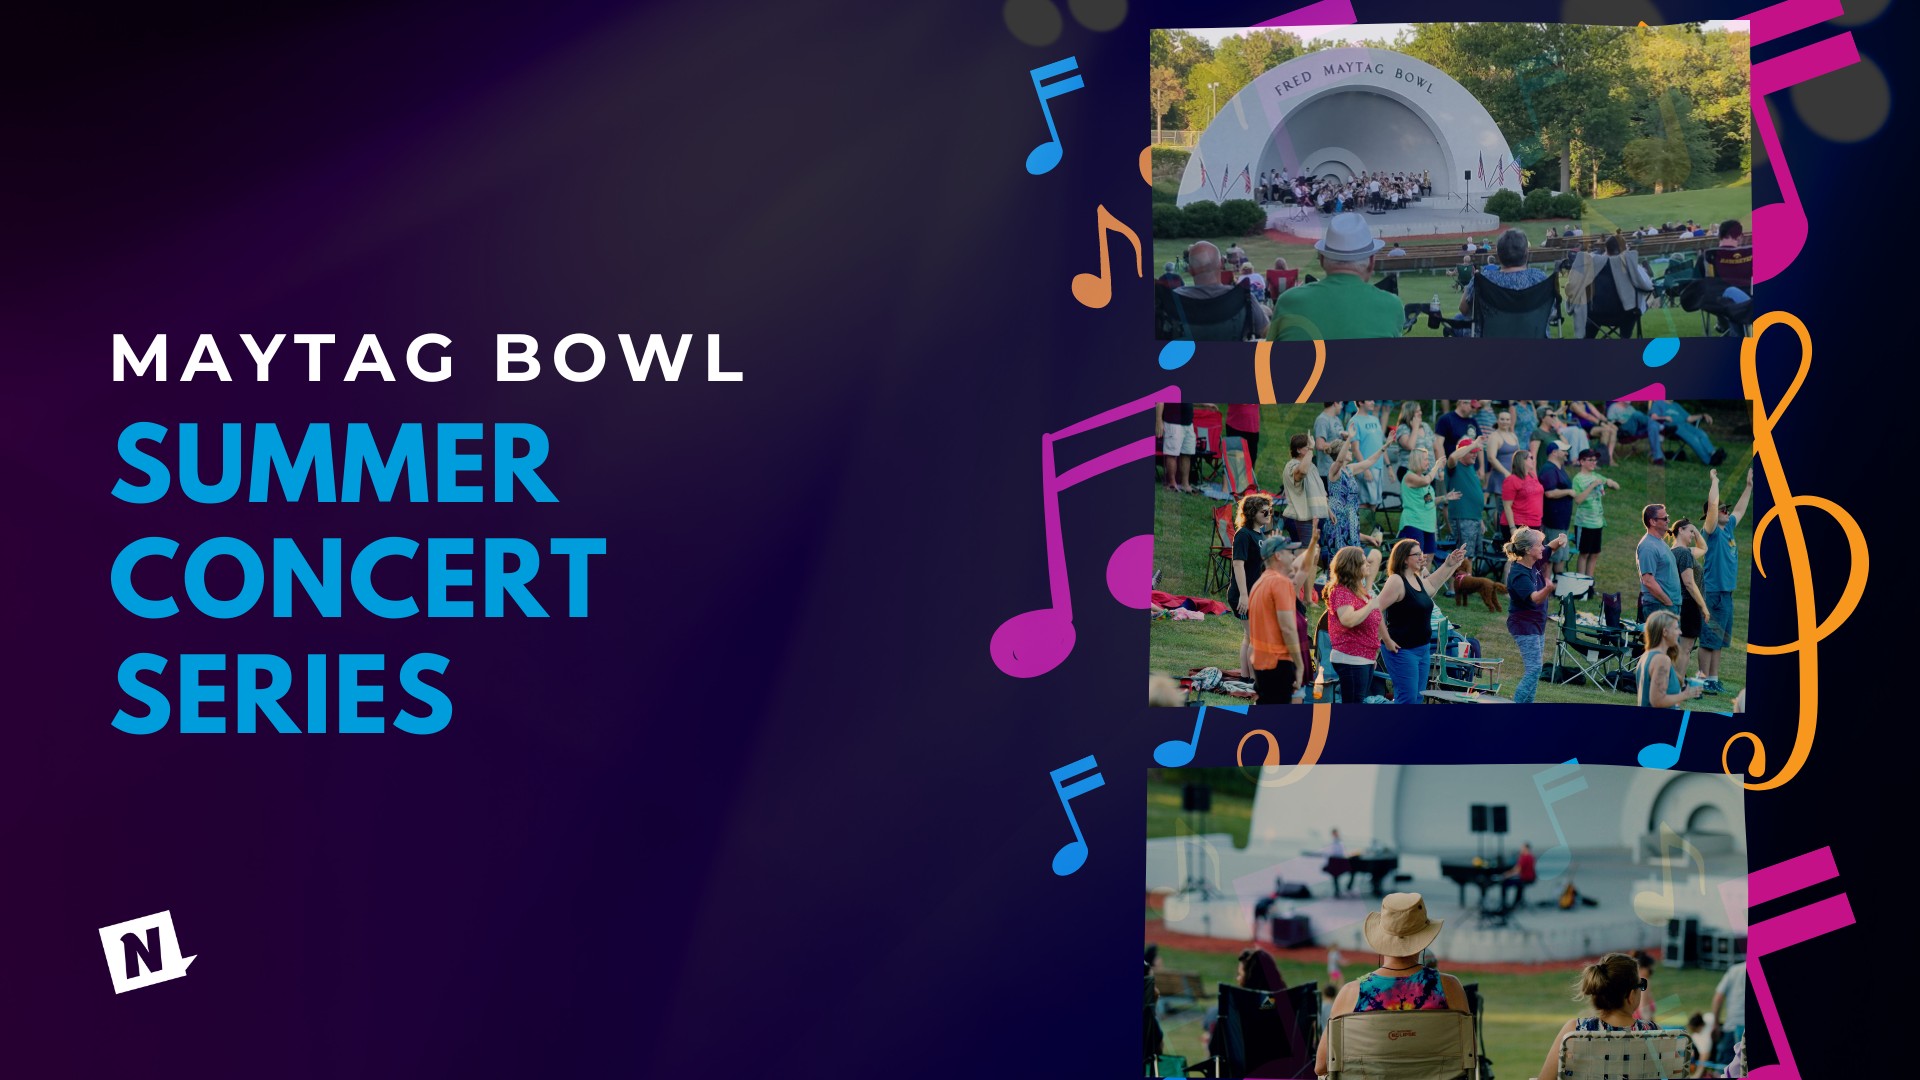 Maytag Bowl Summer Concert Series Photo - Click Here to See